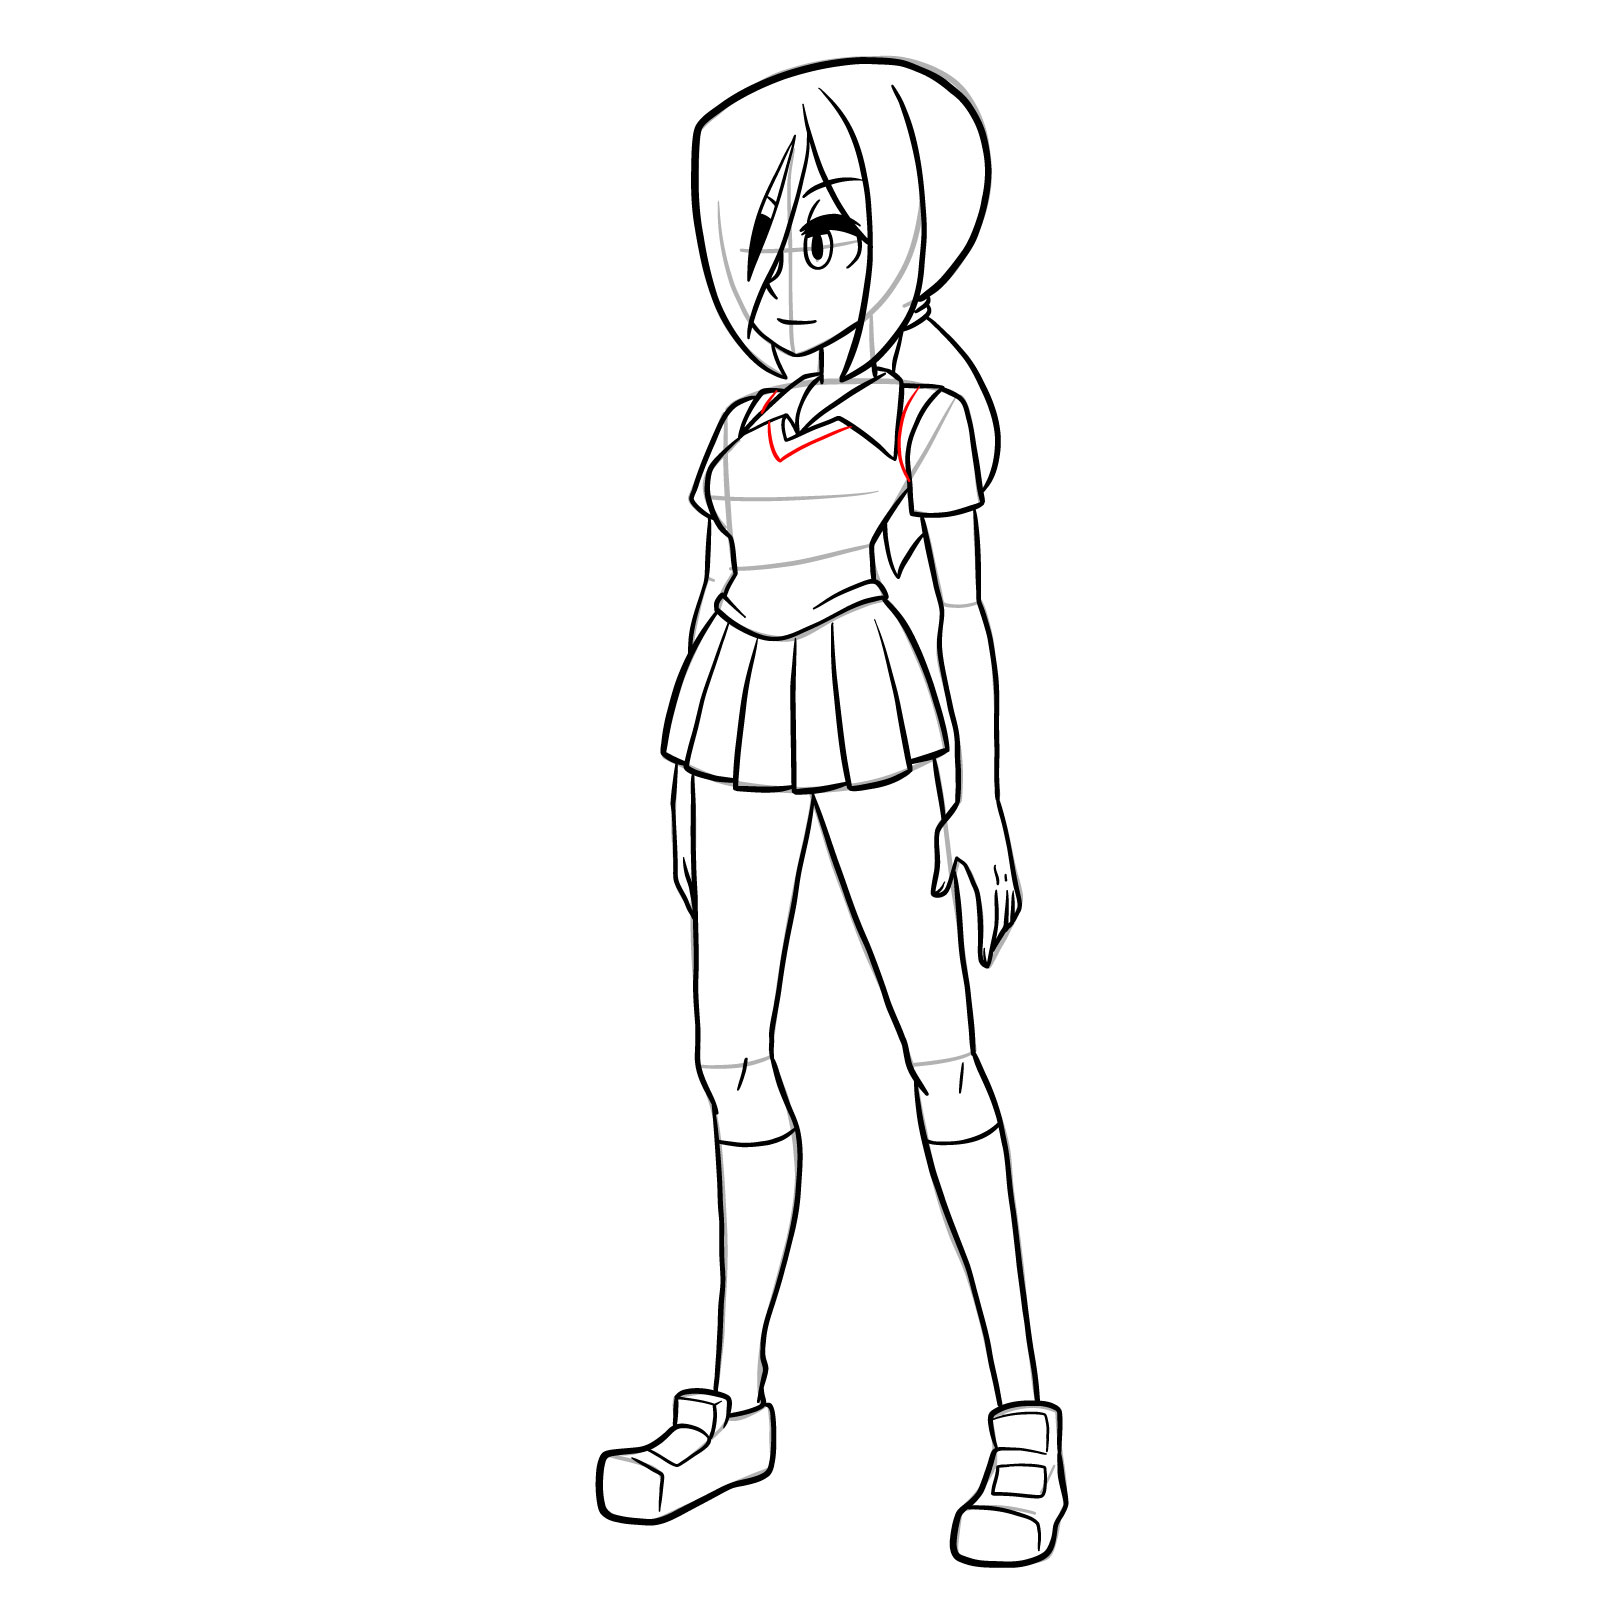 How to draw Teen Parasoul from Skullgirls - step 25